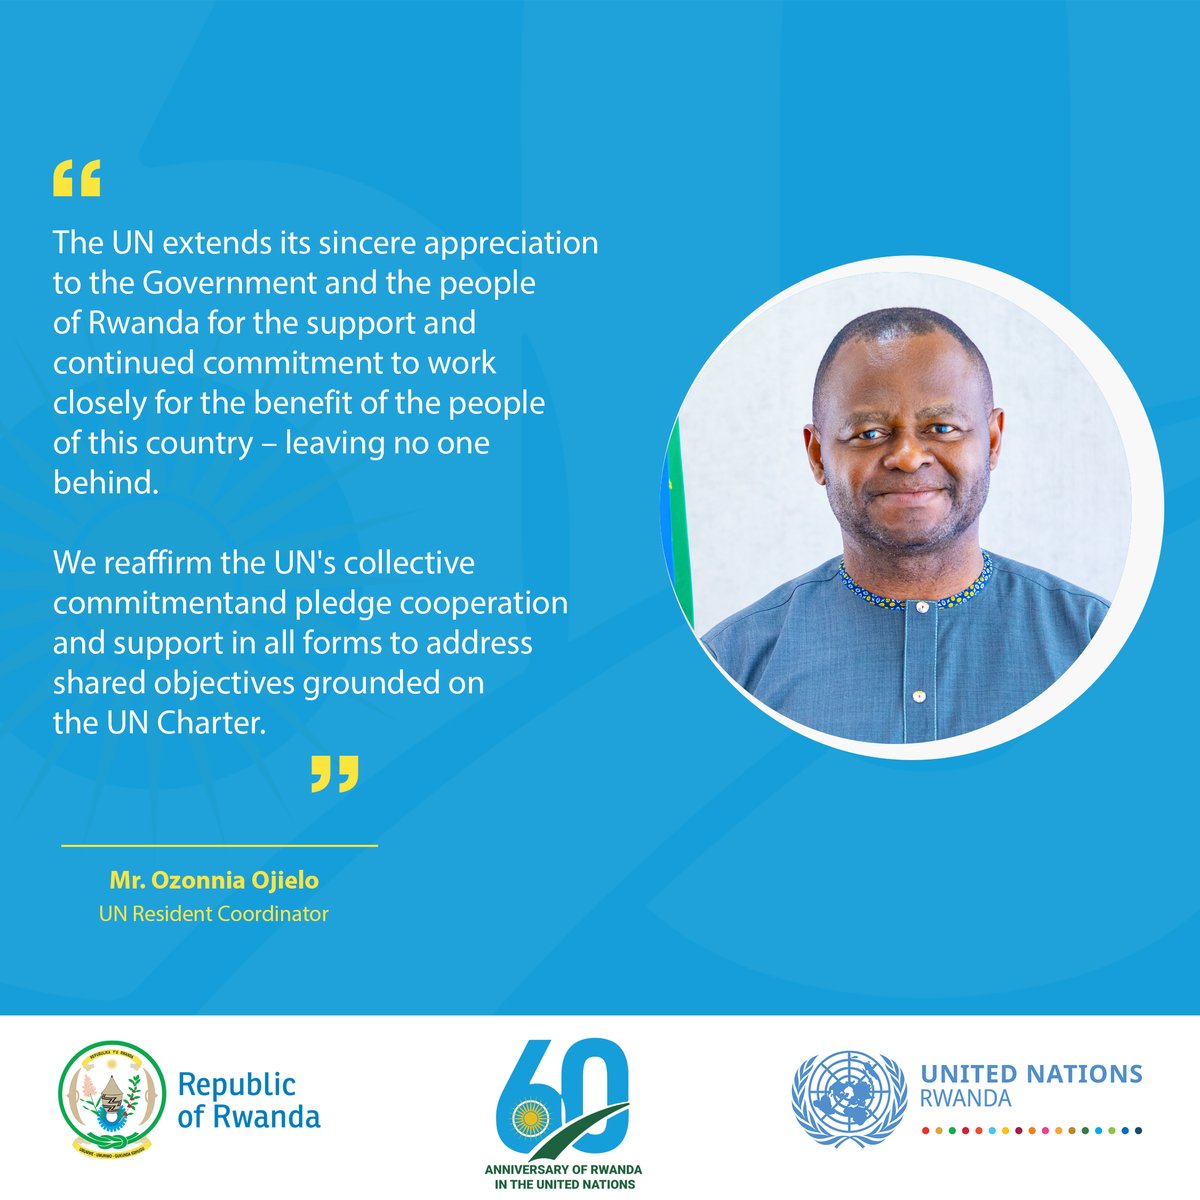 “The UN extends its sincere appreciation to the Government and the people of Rwanda for the support and continued commitment to work closely for the benefit of the people of this country – leaving no one behind.” - UN Resident Coordinator, @ozonnia #60yearsRwandaUN